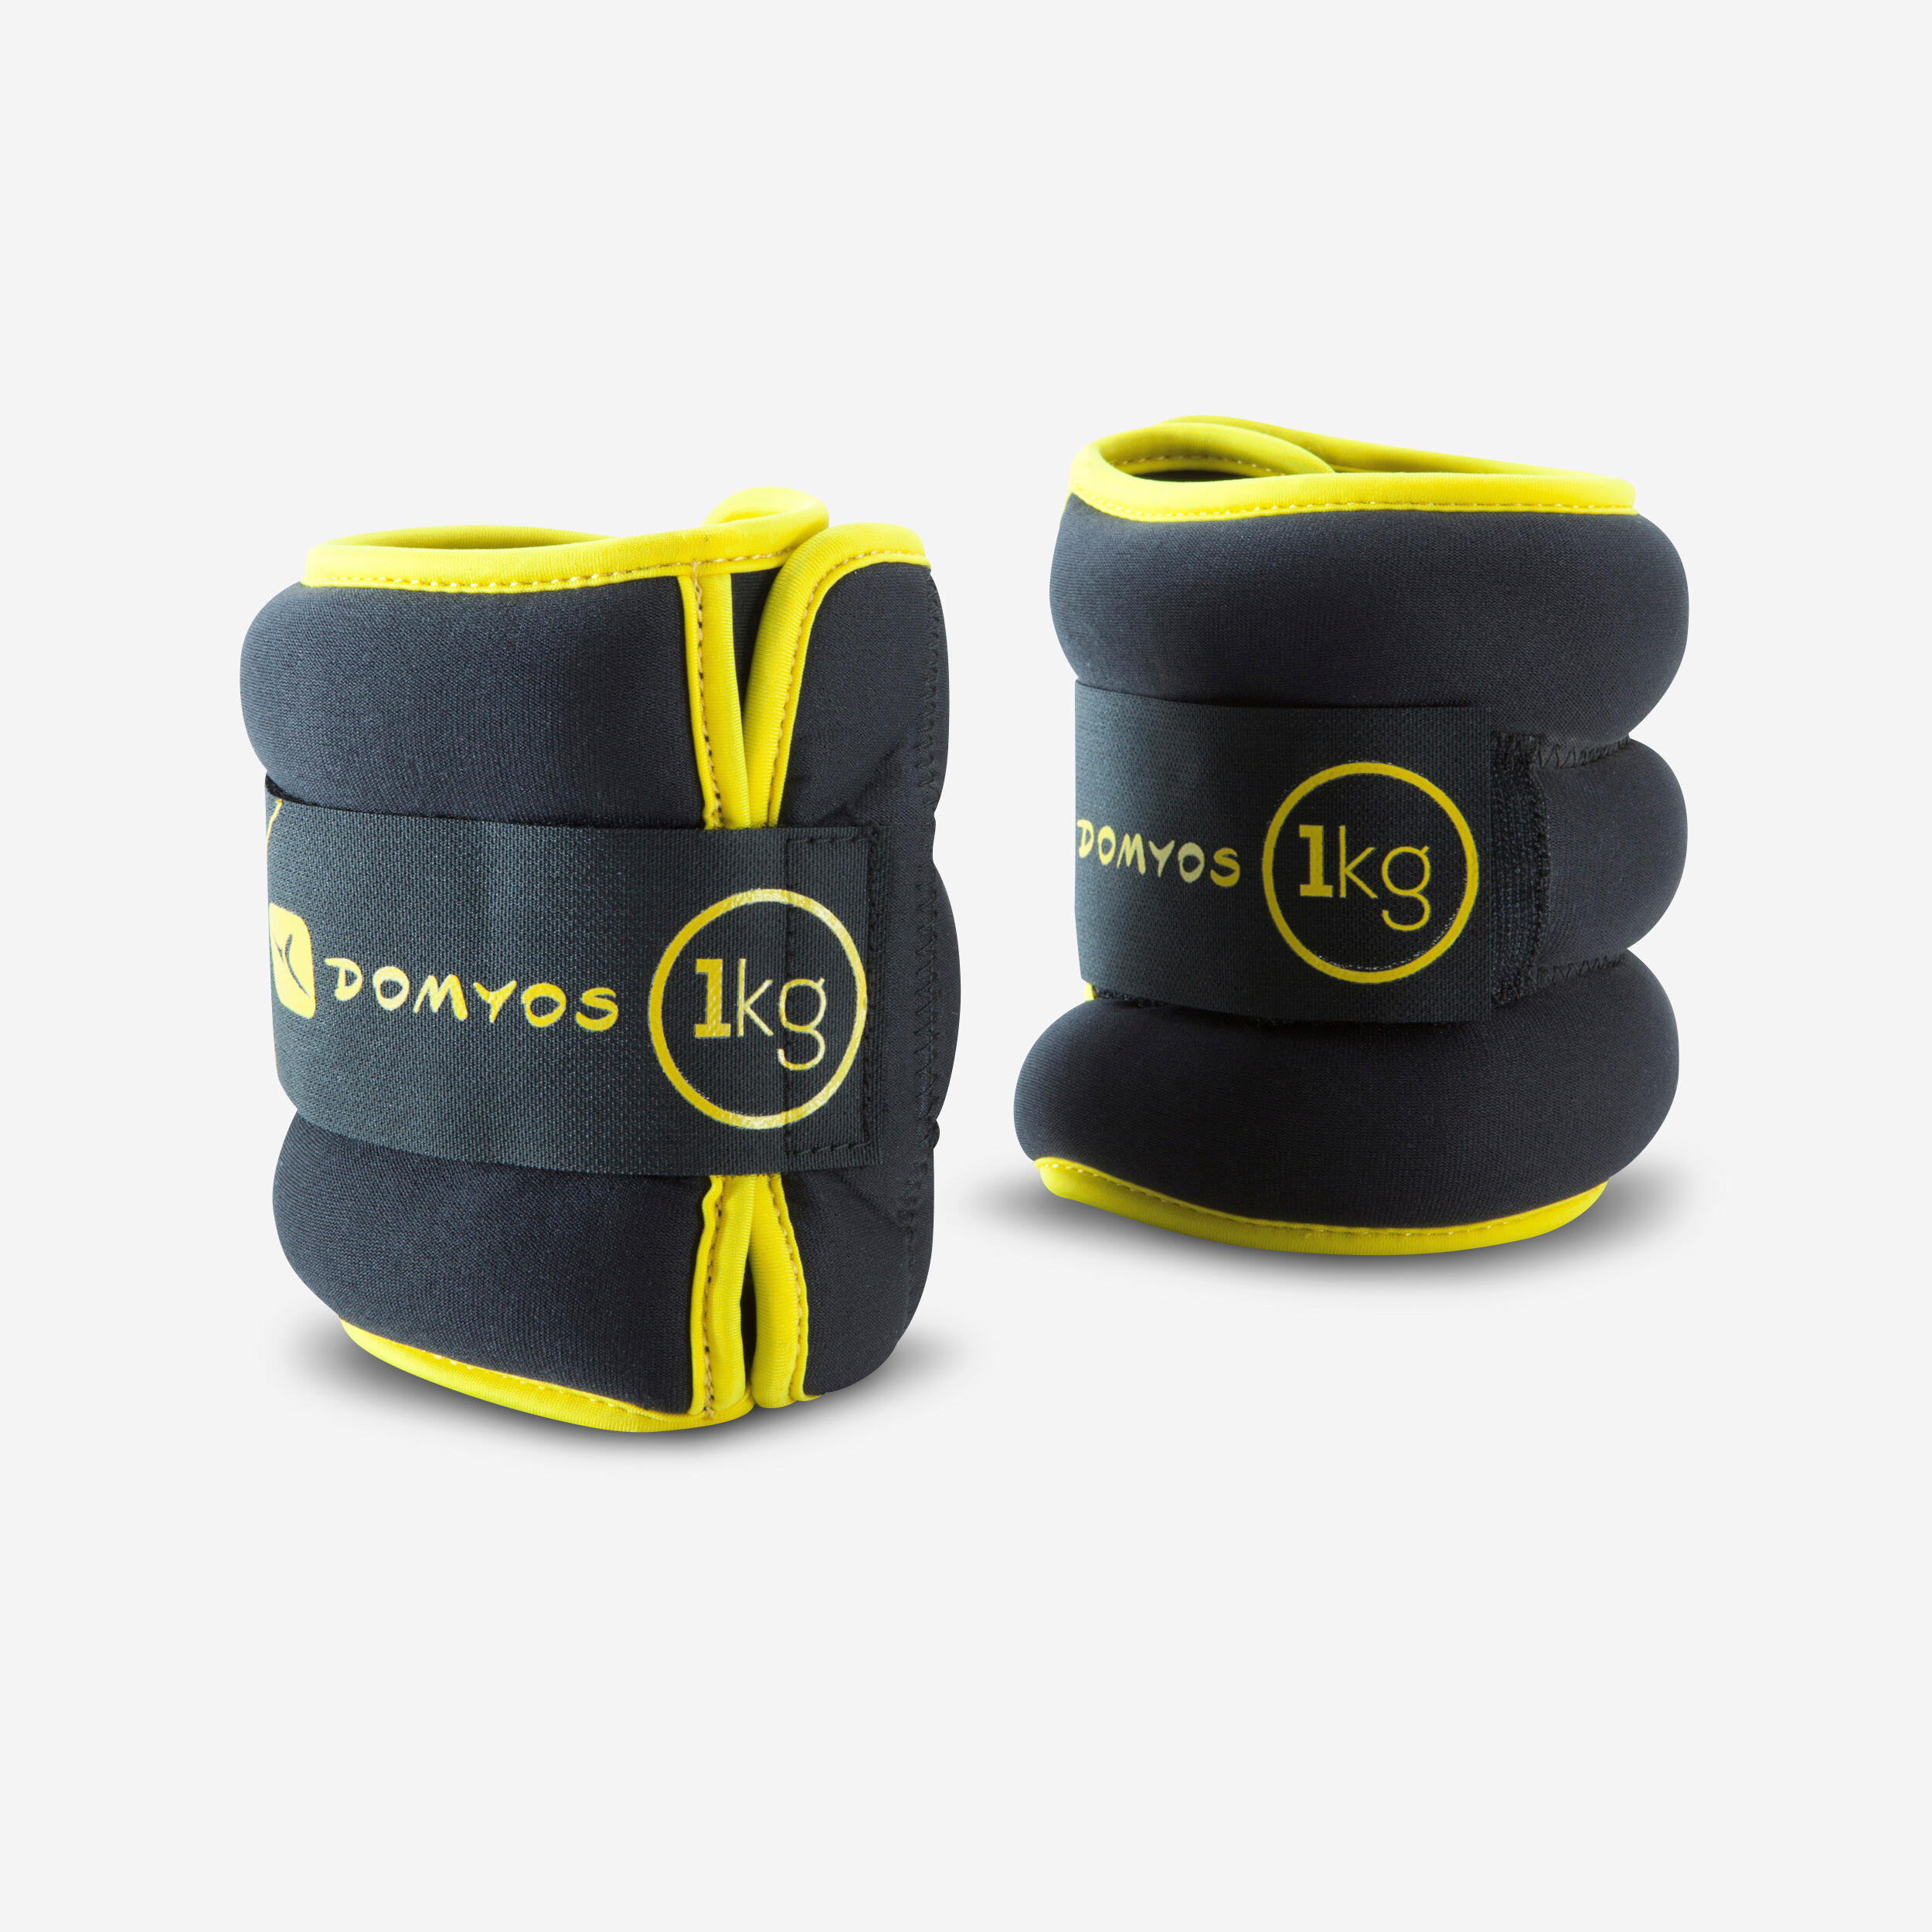 DOMYOS Ankle/Wrist Weights 1 kg x 2 - Yellow